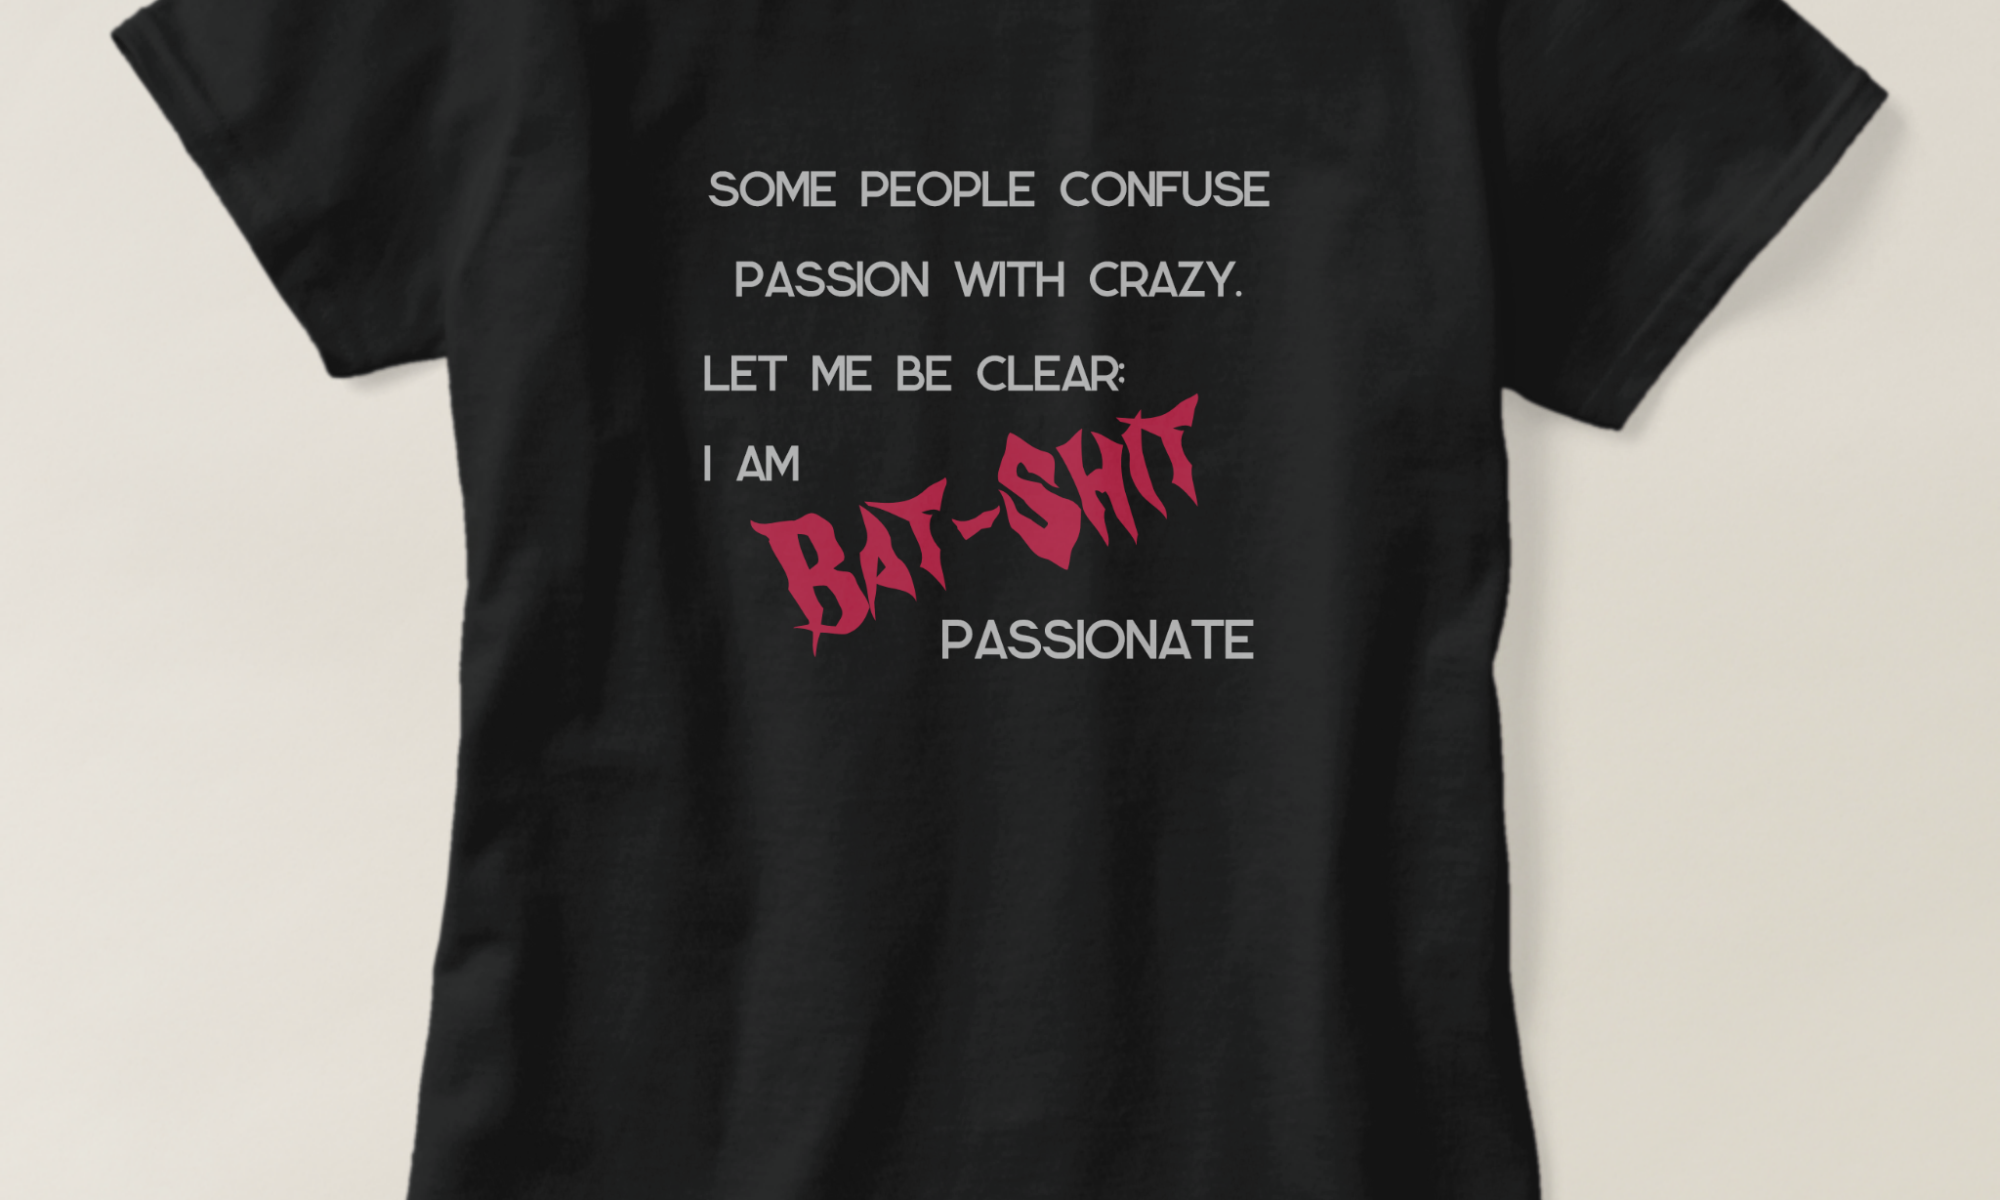 Some people confuse passion with crazy. Let me be clear; I am BAT-SHIT passionate